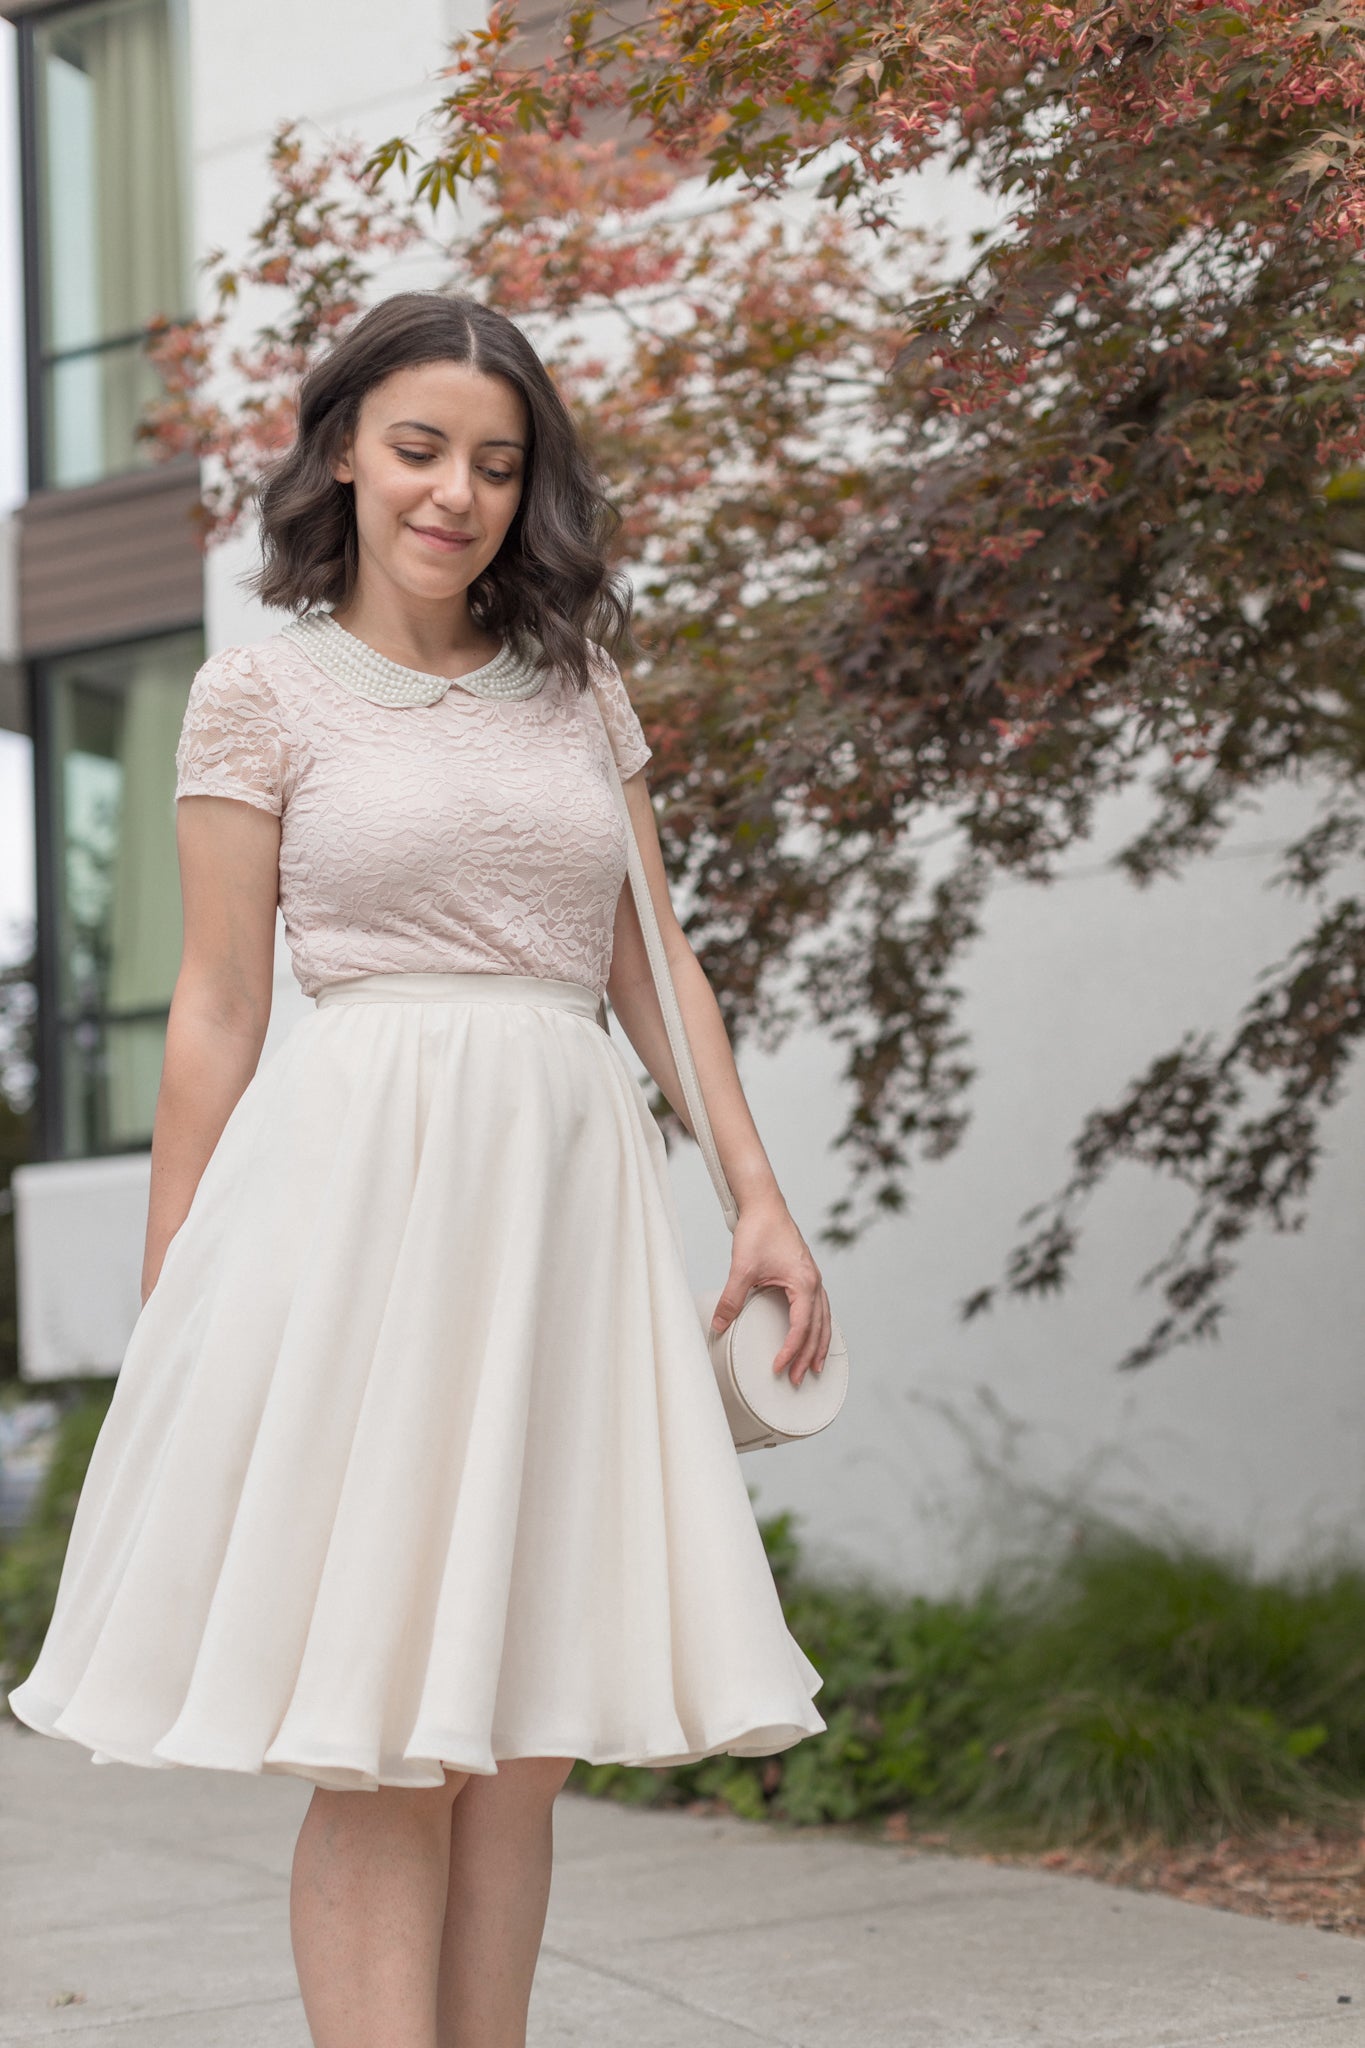 How to Create a Timeless Wardrobe with a Chiffon Skirt